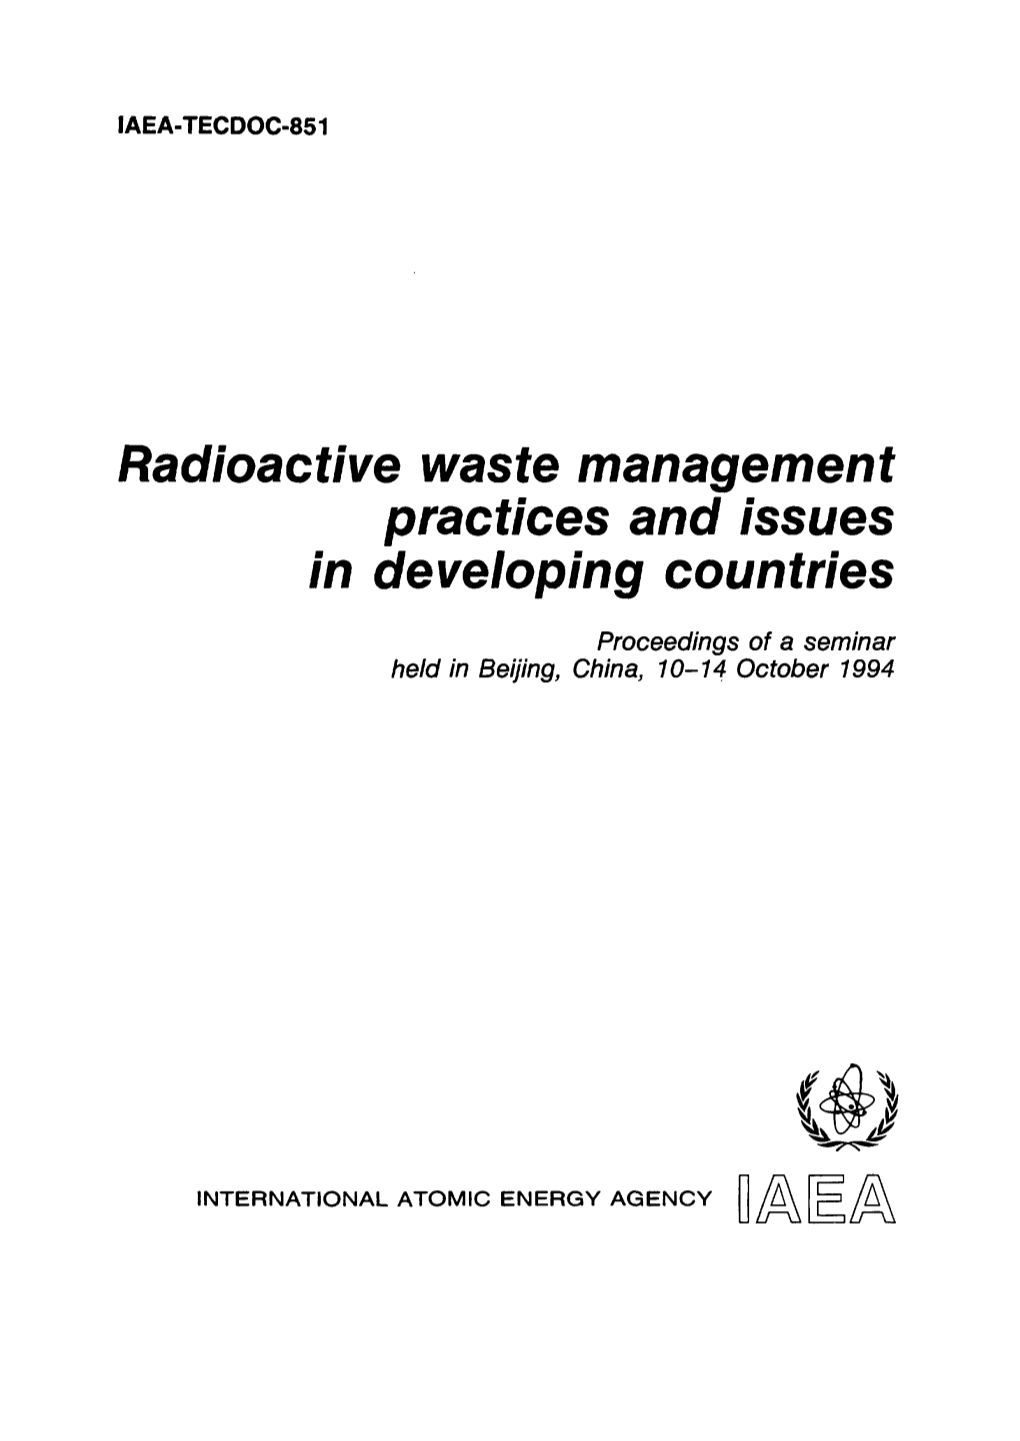 Radioactive Waste Management Practices and Issues in Developing